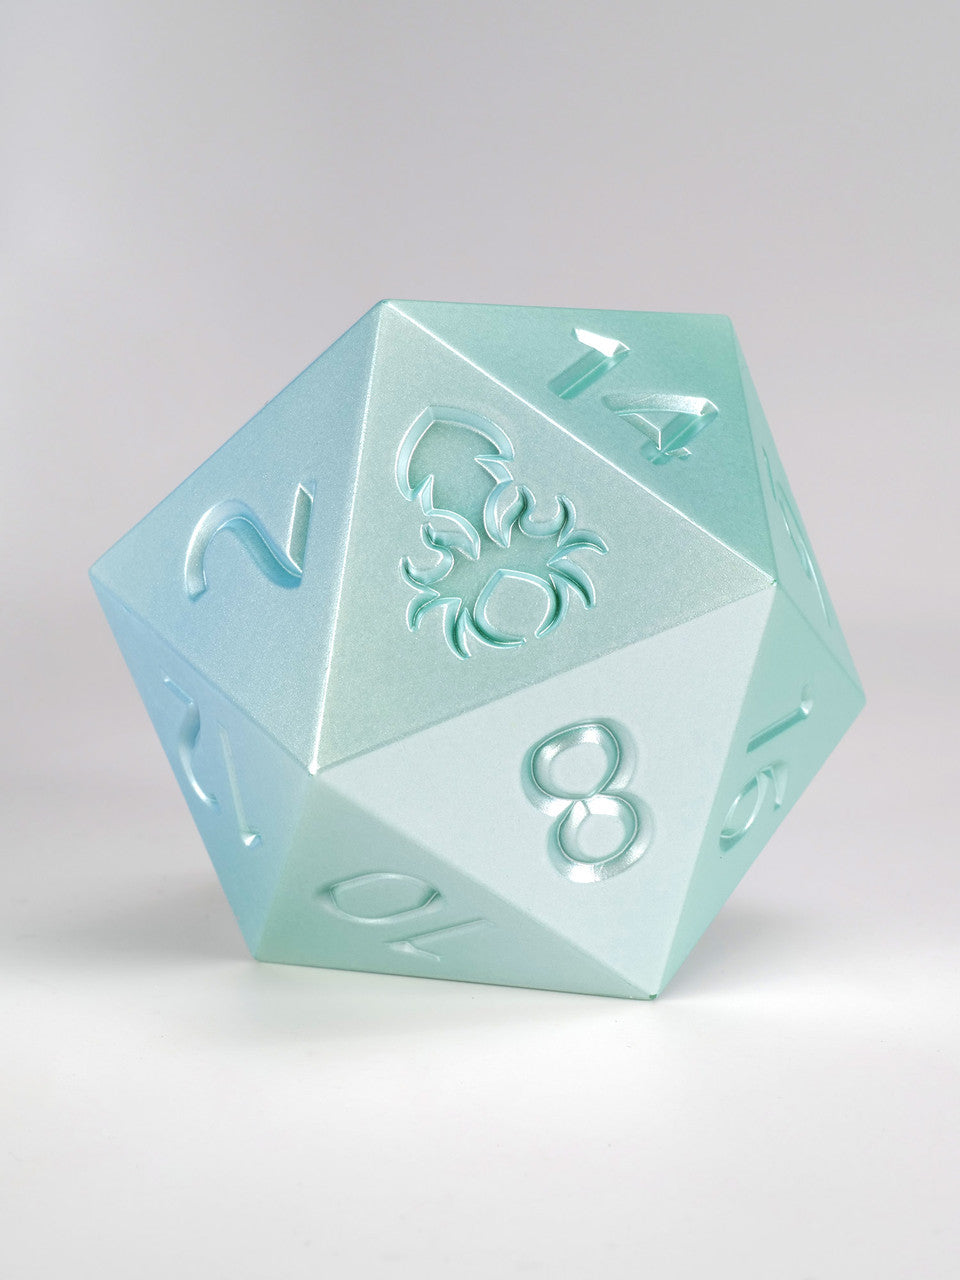 Ombre Teal to Azure 55mm D20 Dice